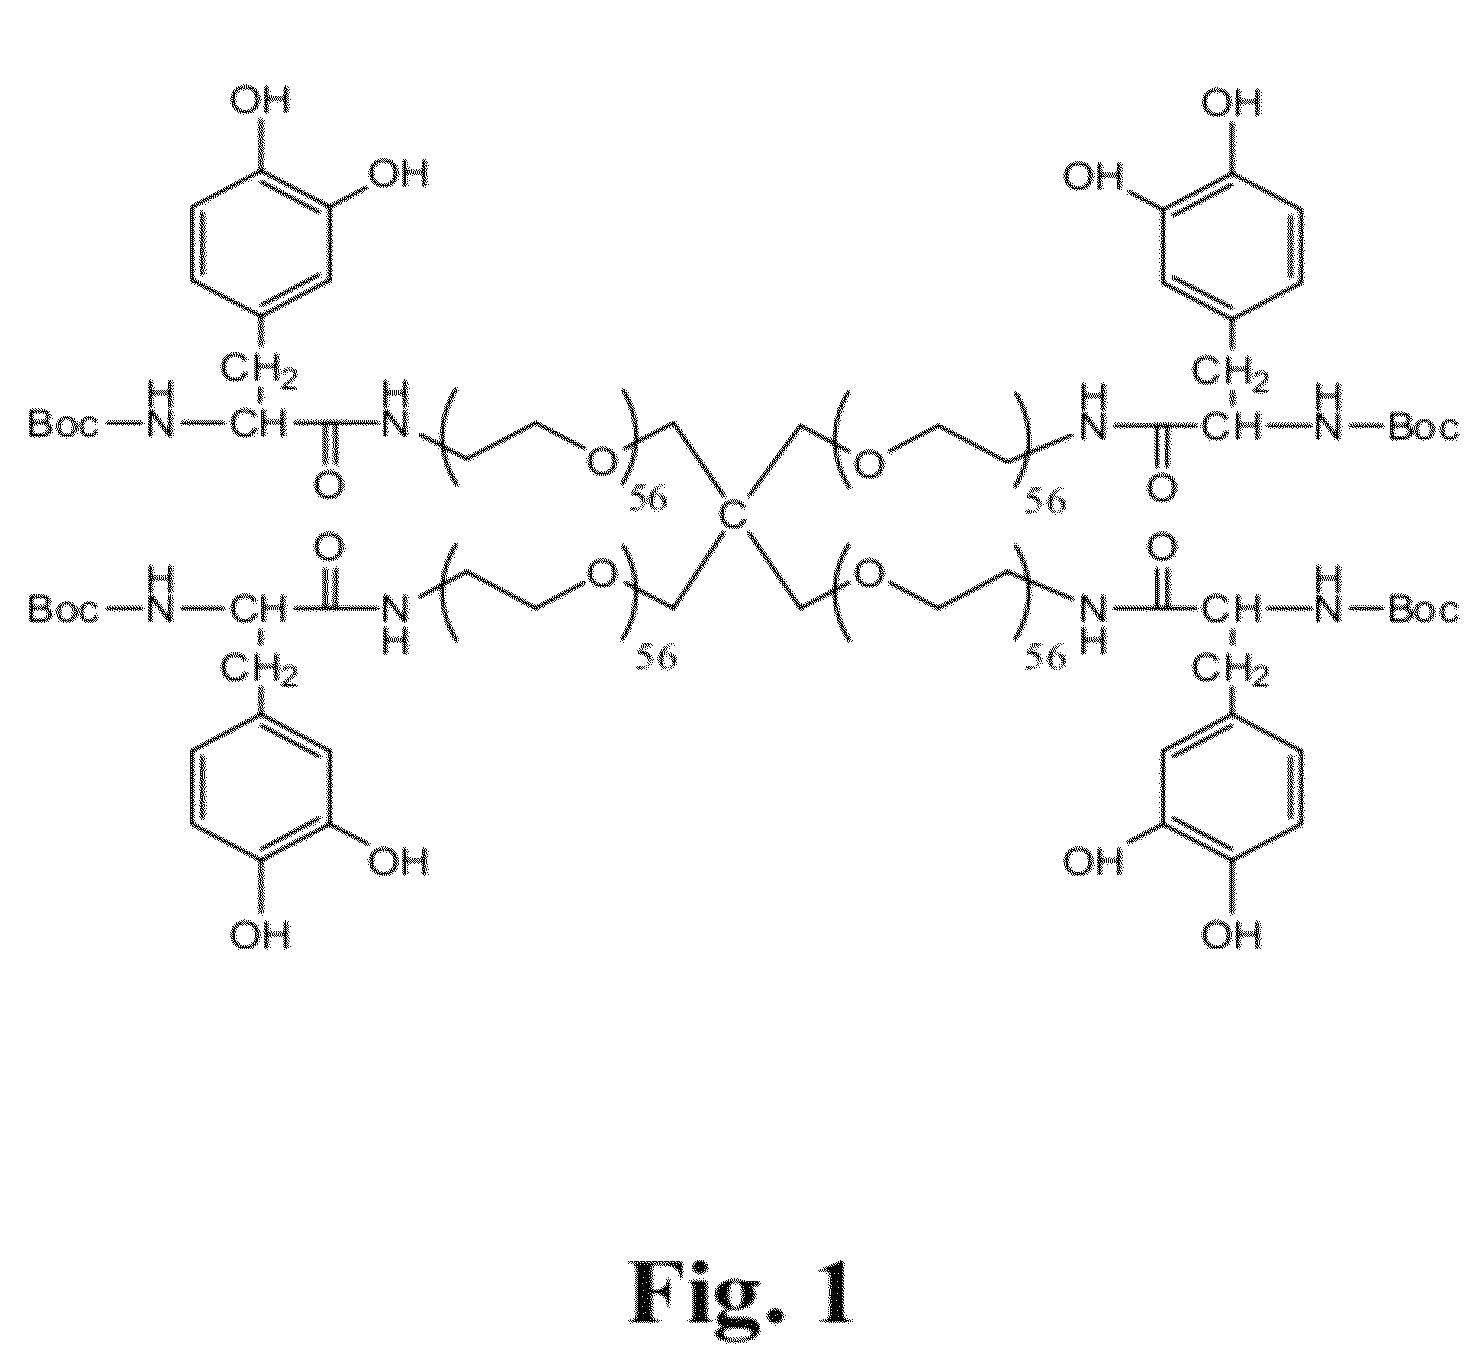 Adhesive compounds and methods use for hernia repair